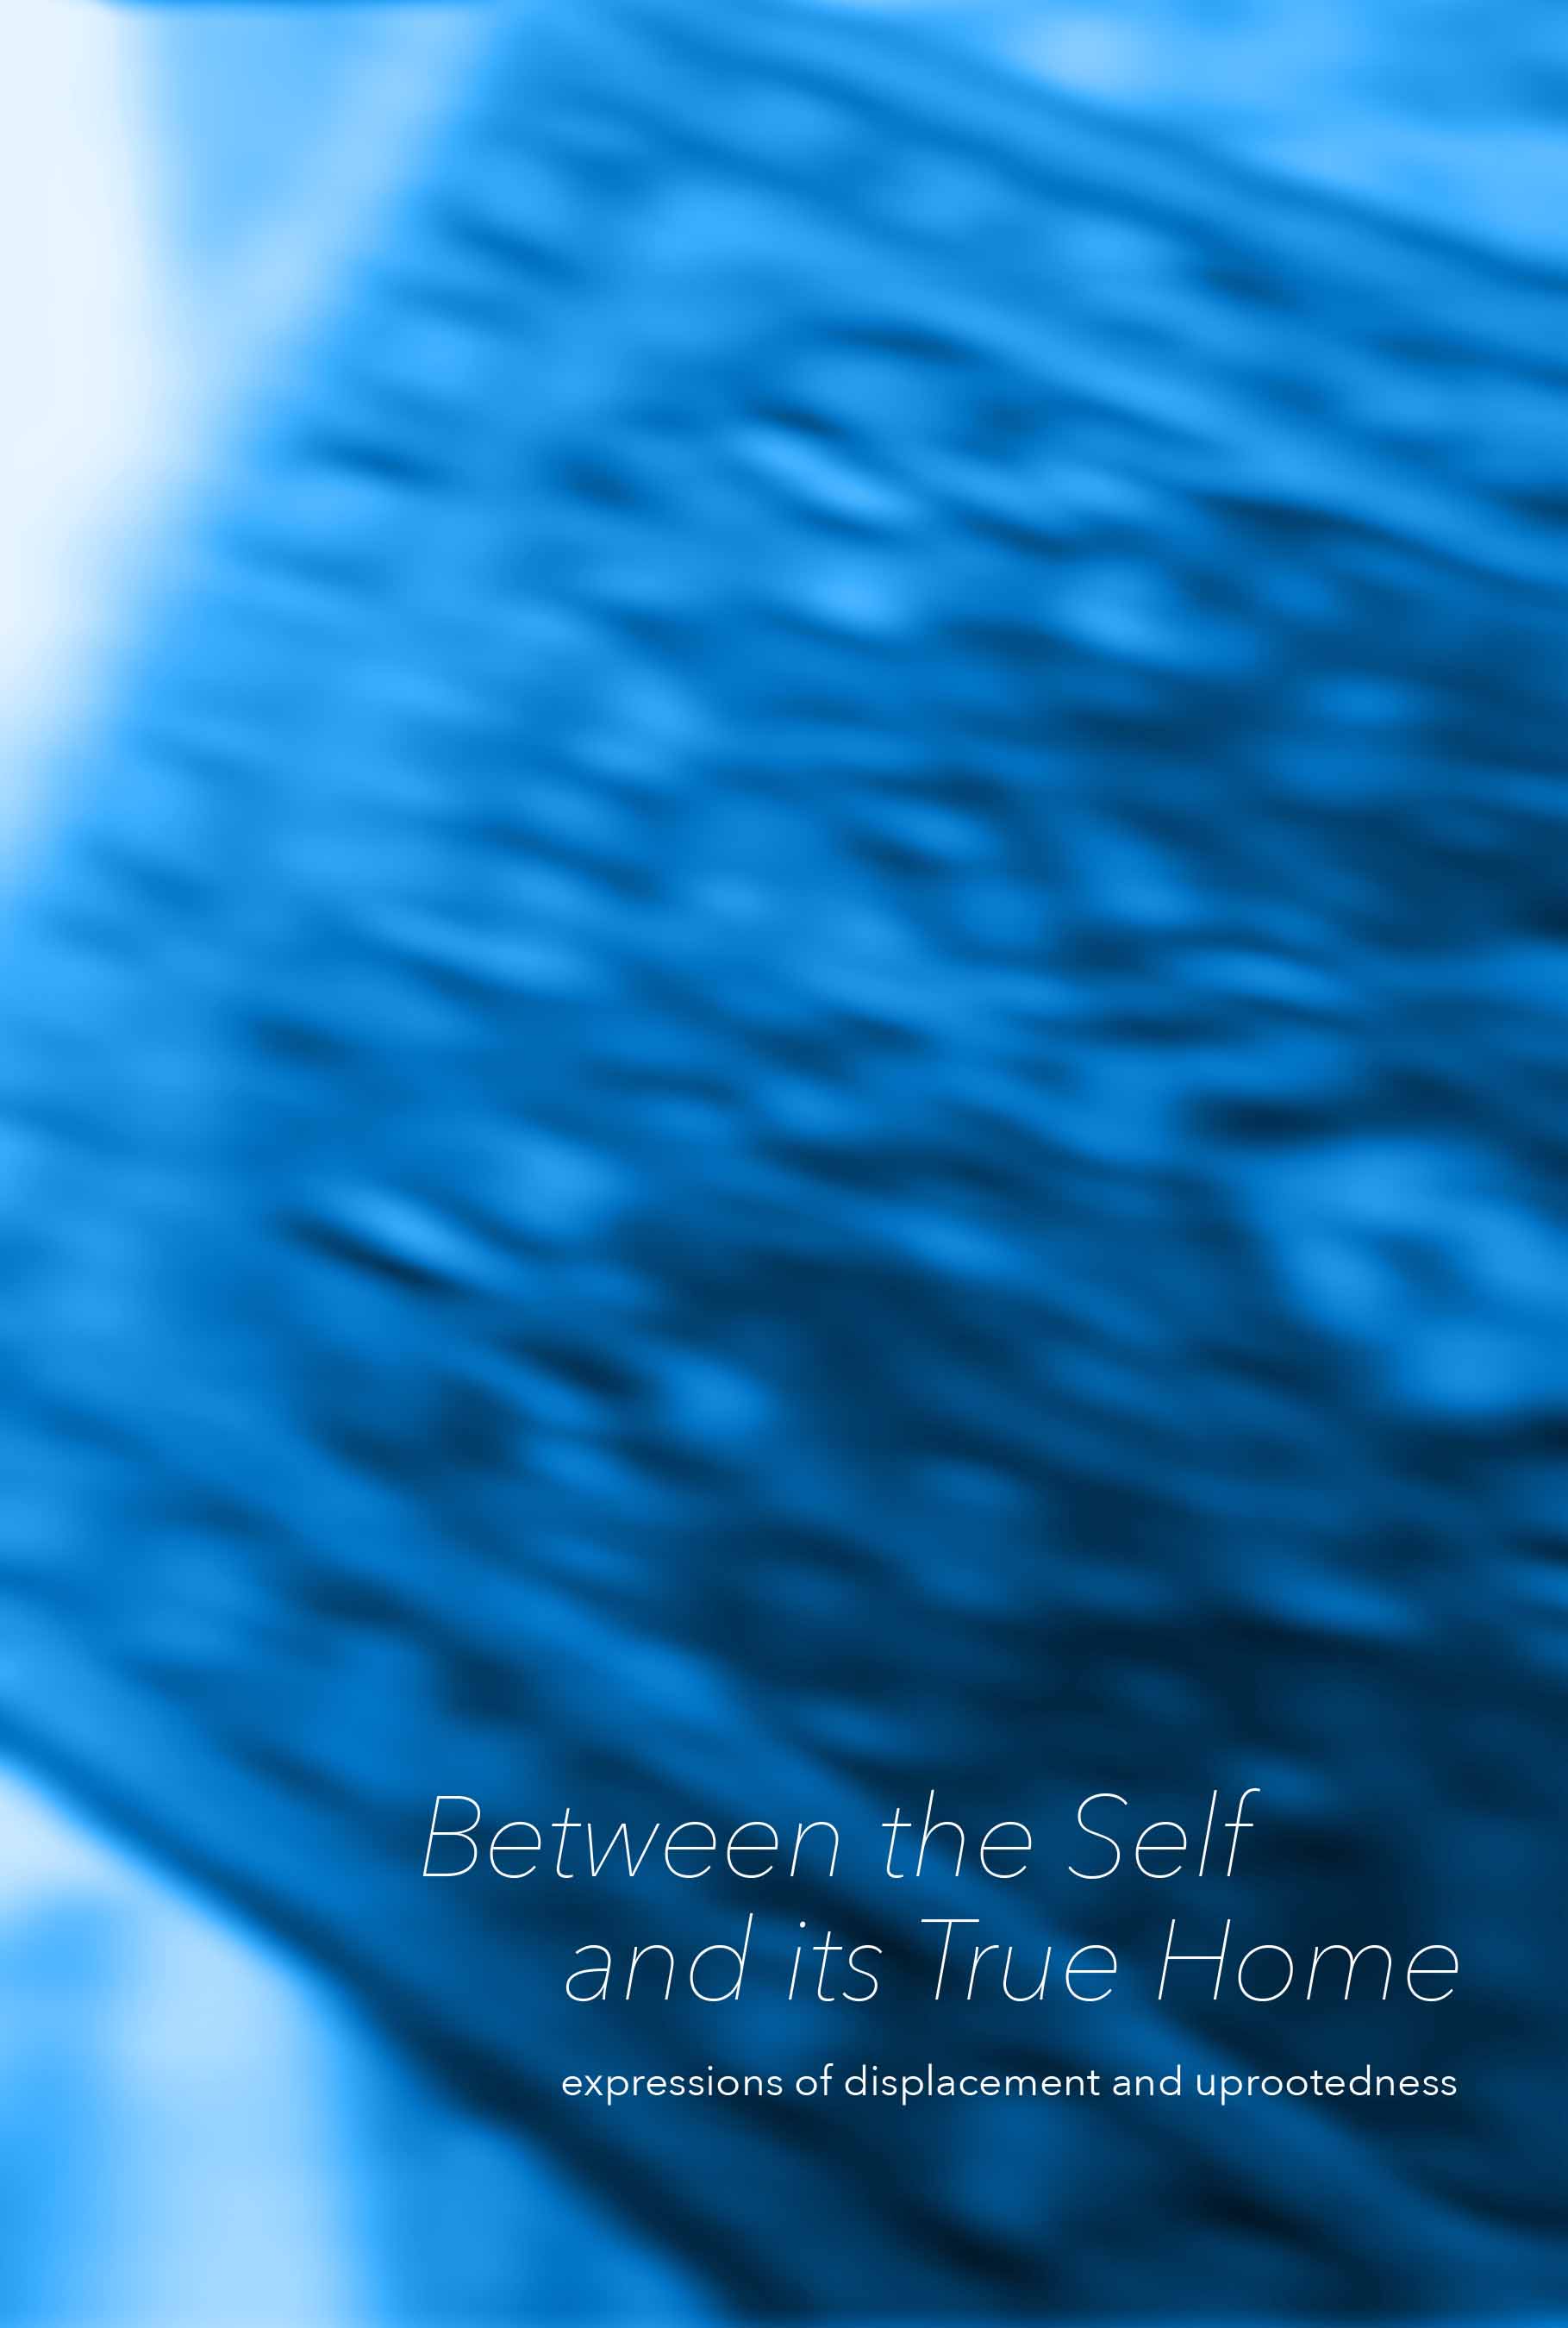 Between the Self and its True Home <br />expressions of displacement and uprootedness  